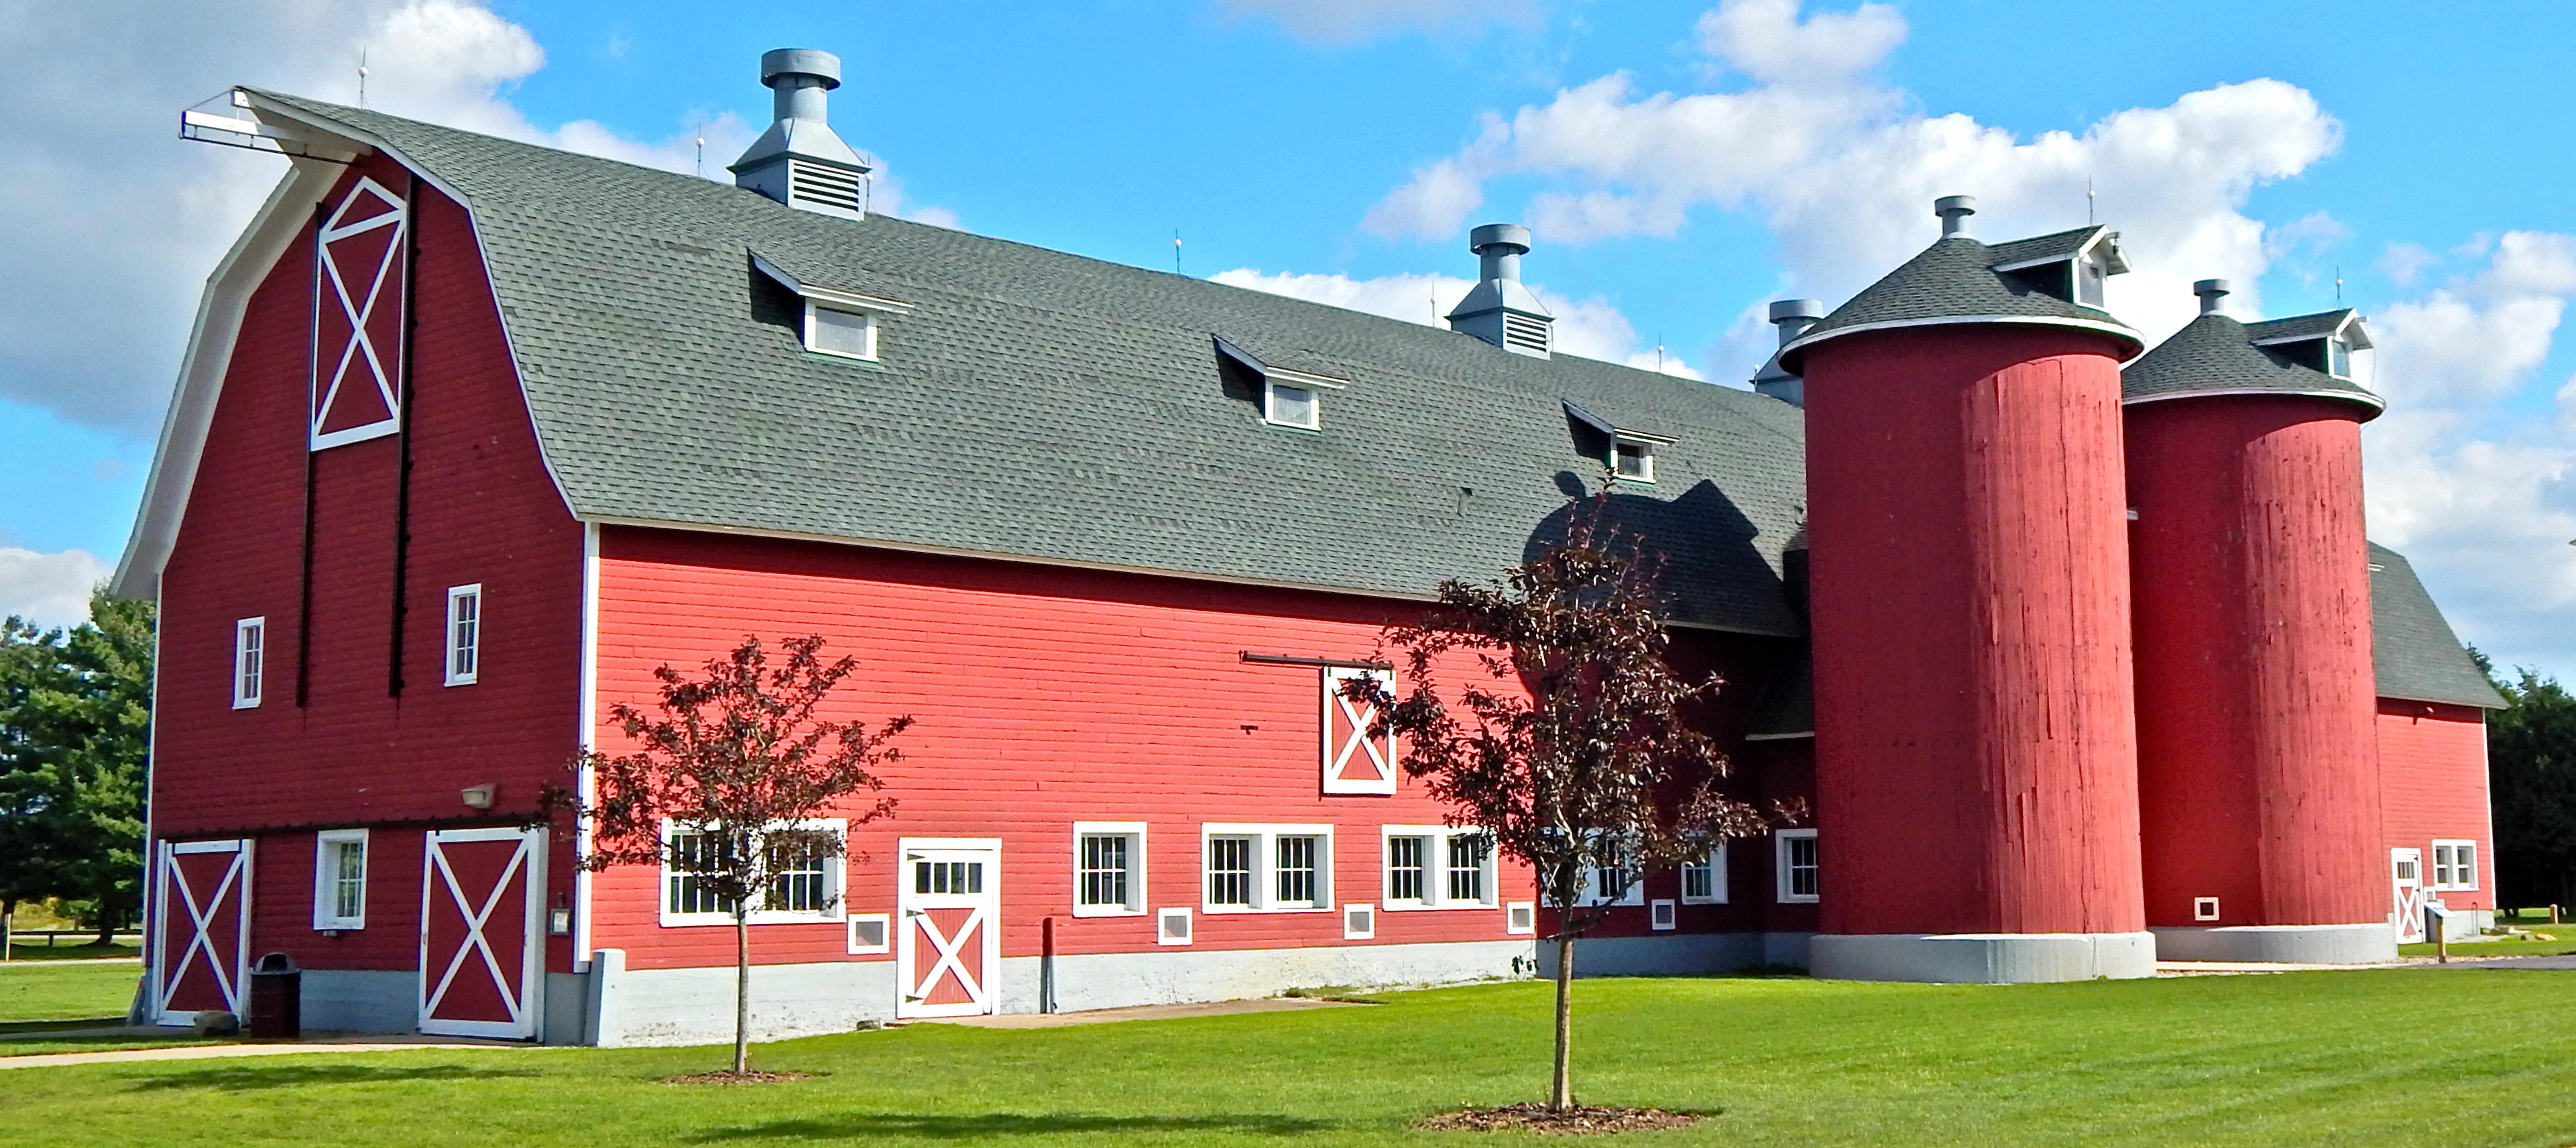 File:St. Patrick's County Park Red Barn North and West Walls.JPG ...